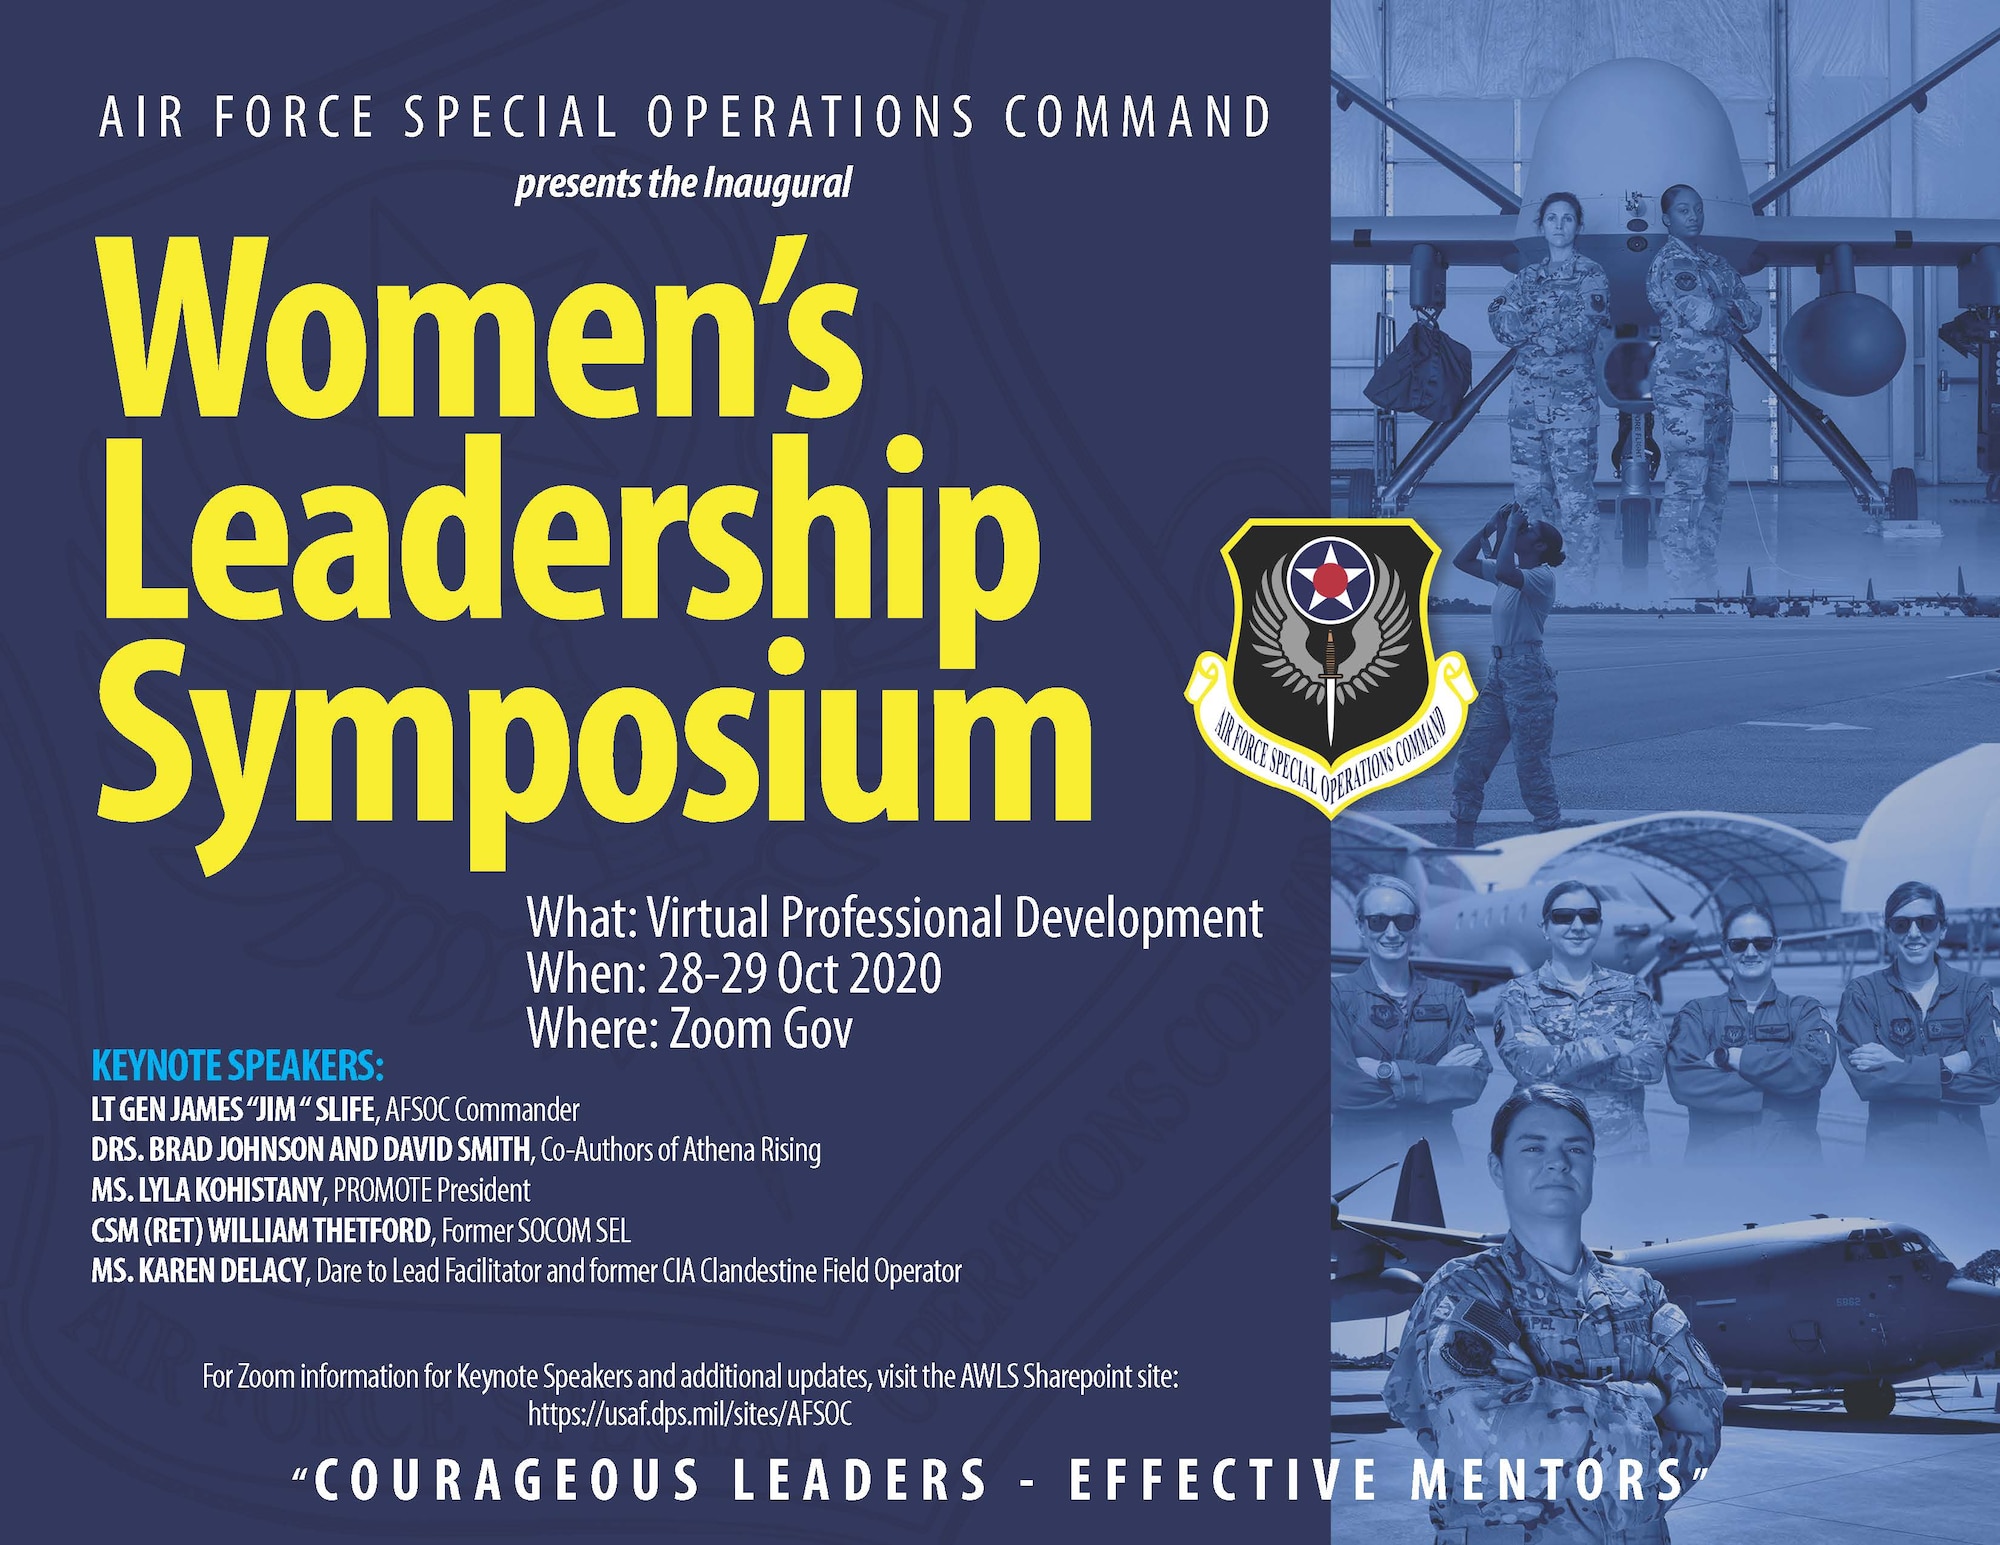 AFSOC to host first virtual Women’s Leadership Symposium